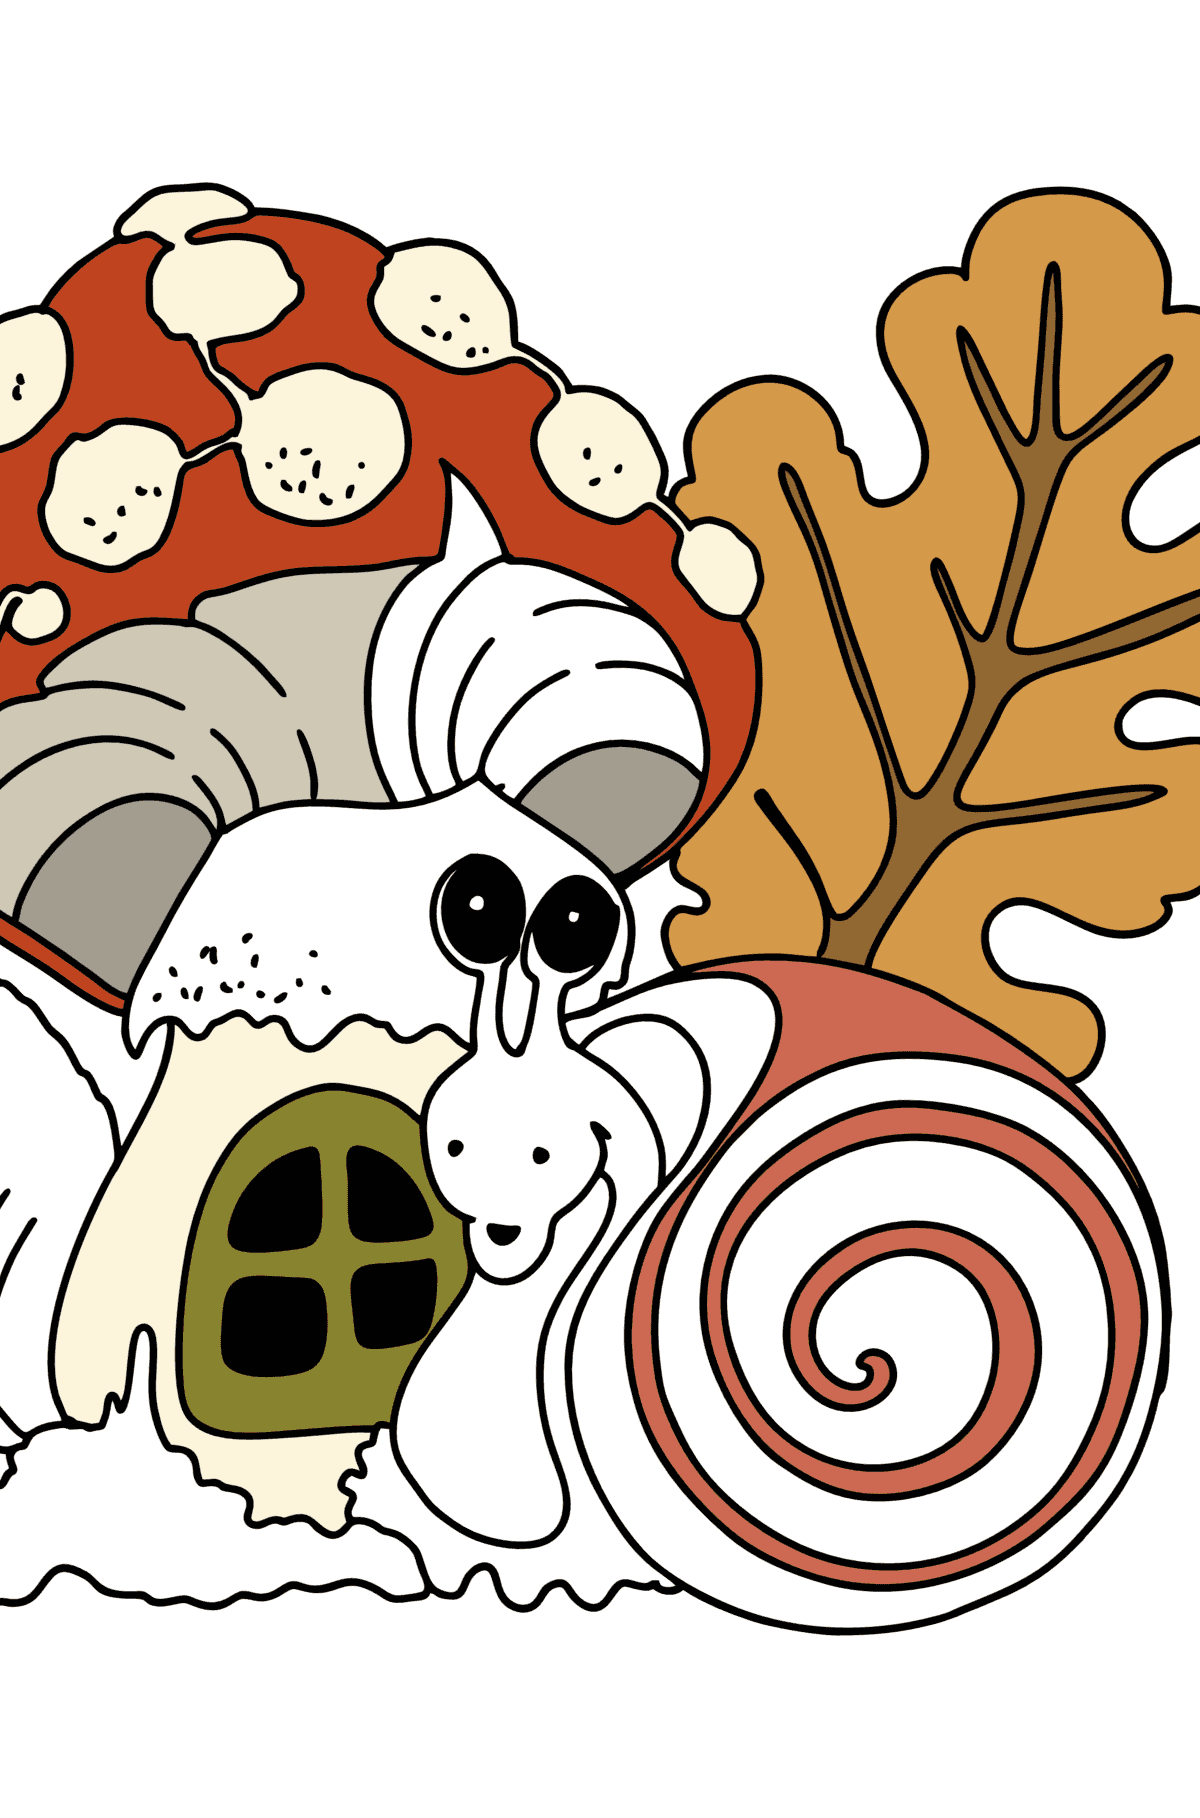 Snail and Amanita coloring page - Coloring Pages for Kids